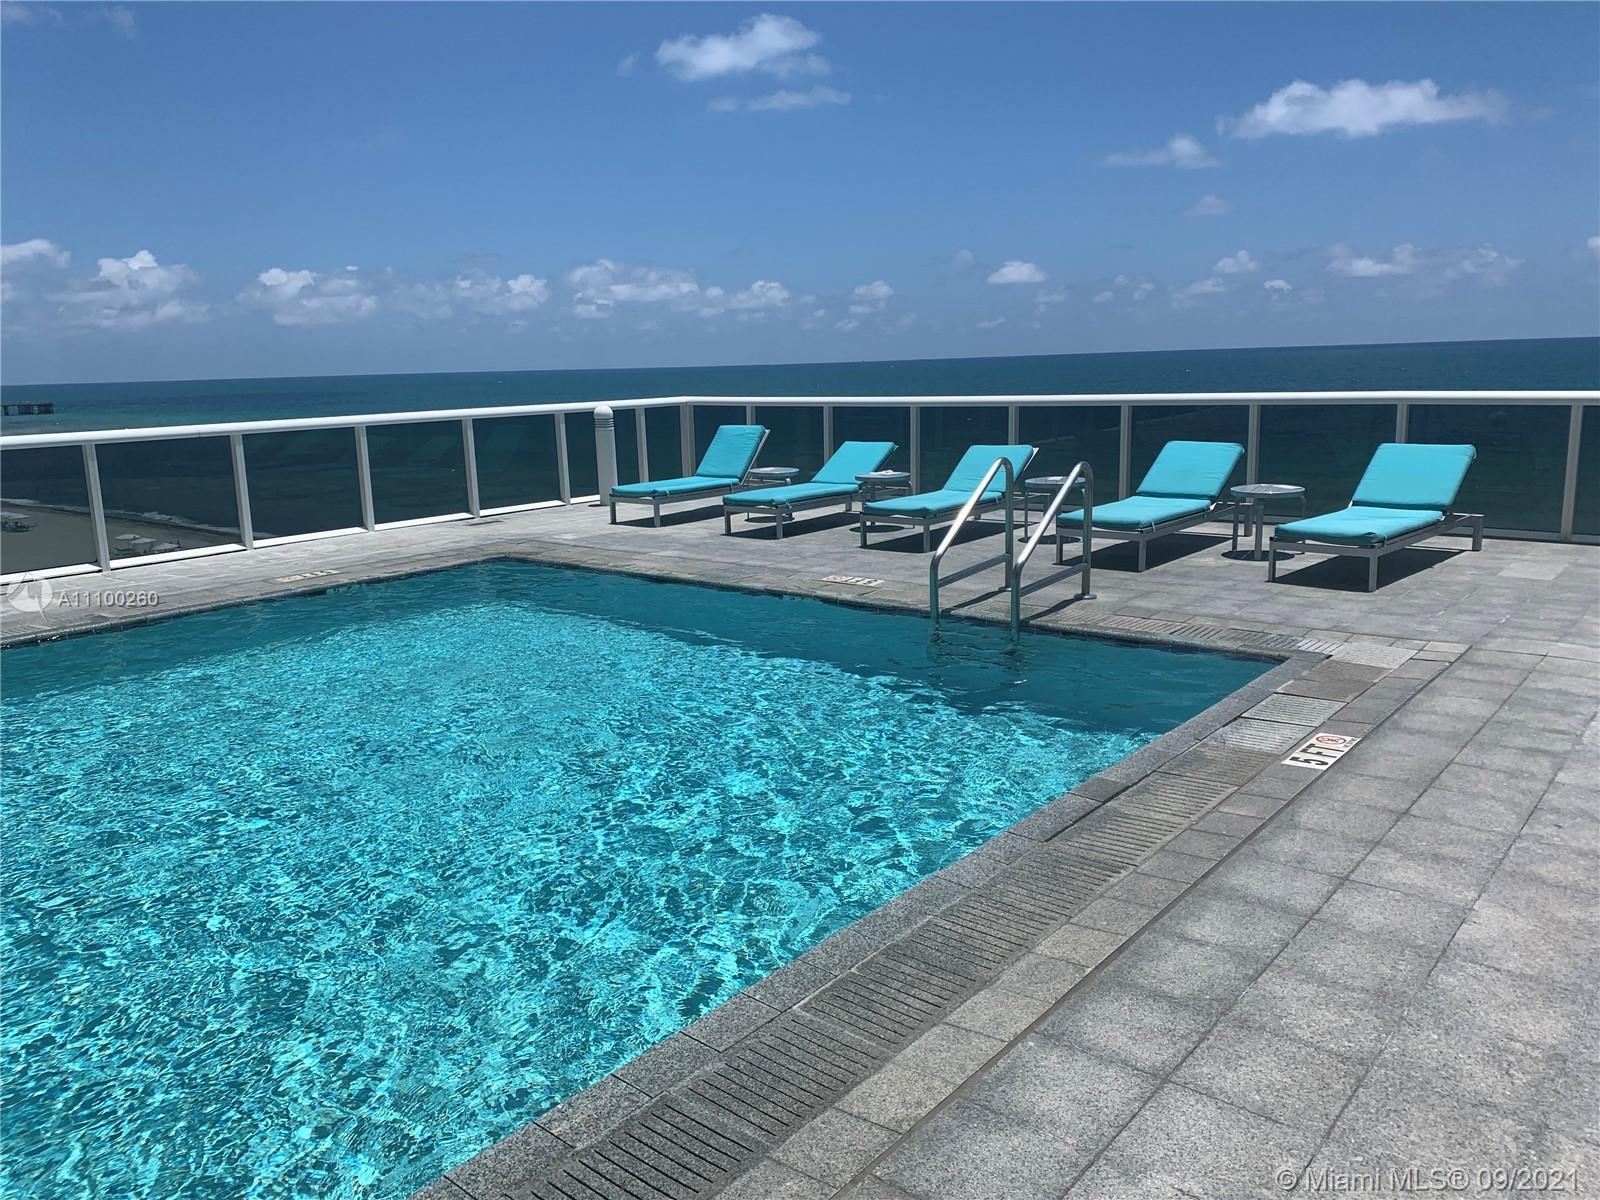 15811 Collins Ave 3305, Sunny Isles Beach, Florida 33160, 2 Bedrooms Bedrooms, ,2 BathroomsBathrooms,Residential,For Sale,15811 Collins Ave 3305,A11100260